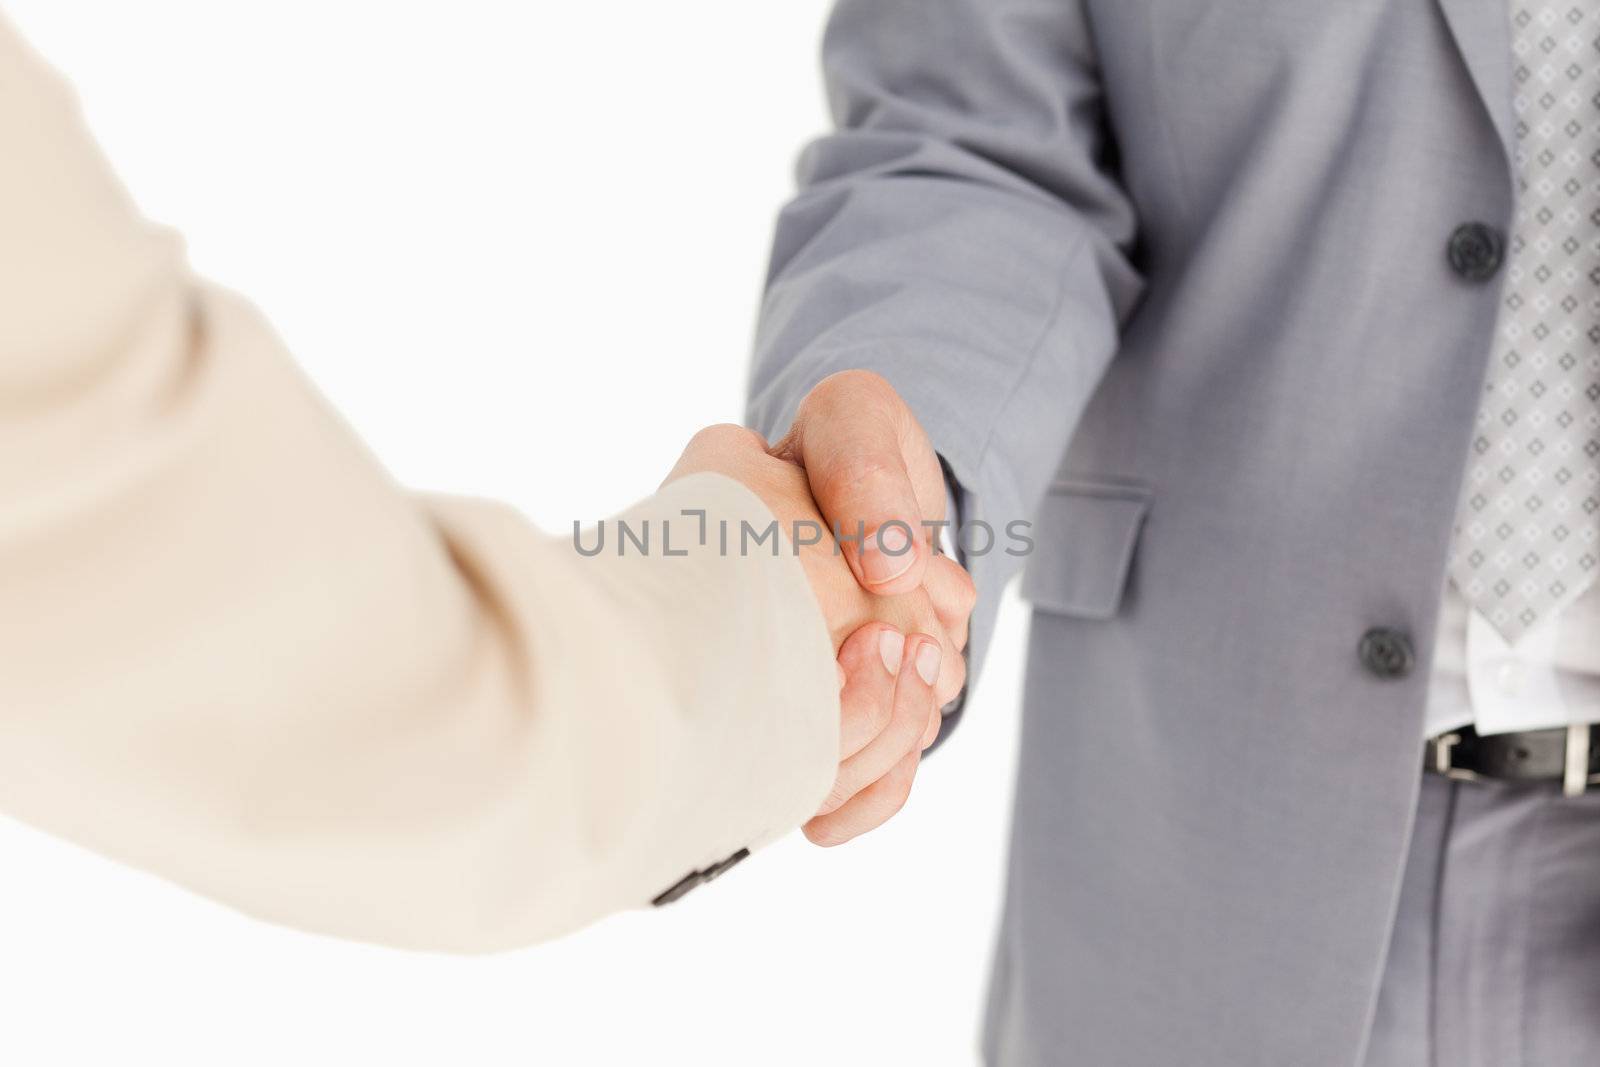 People in suit having an agreement against white background